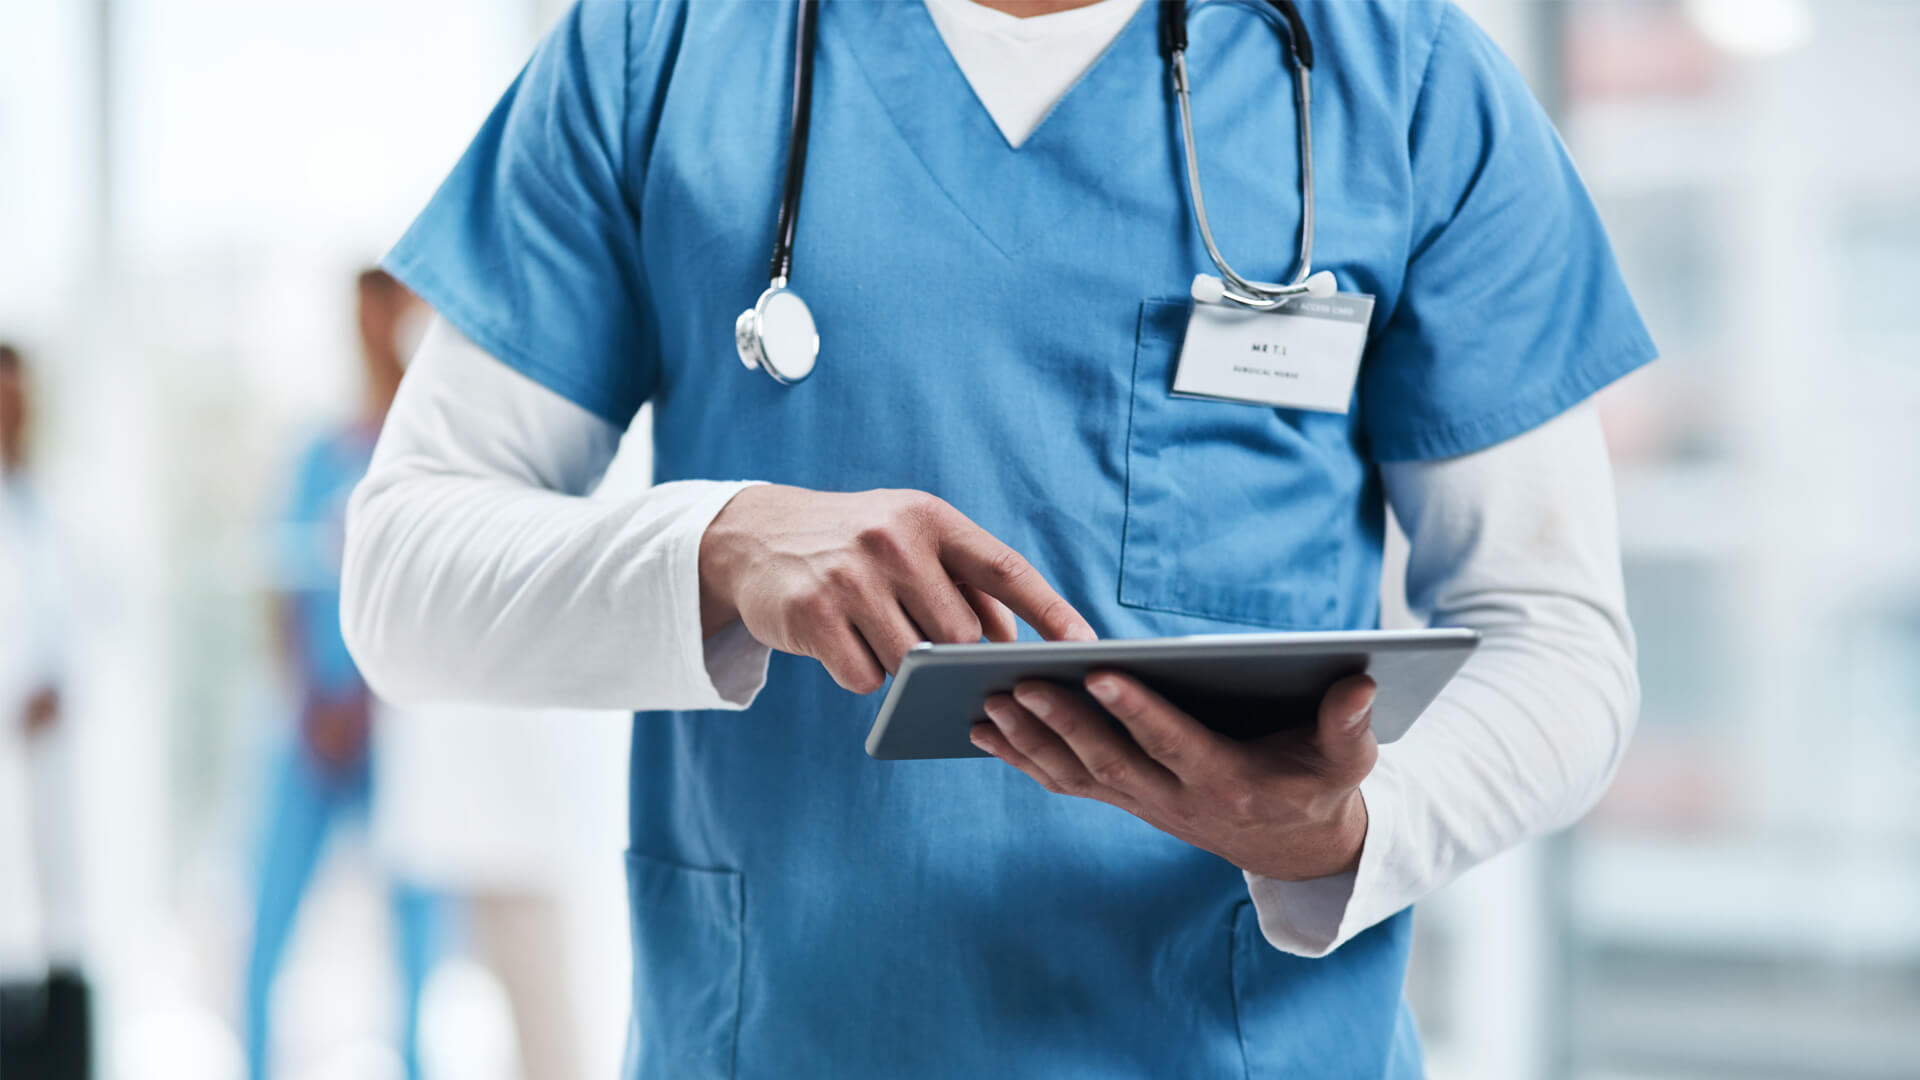 Healthcare practitioner accessing real time information on the EHR